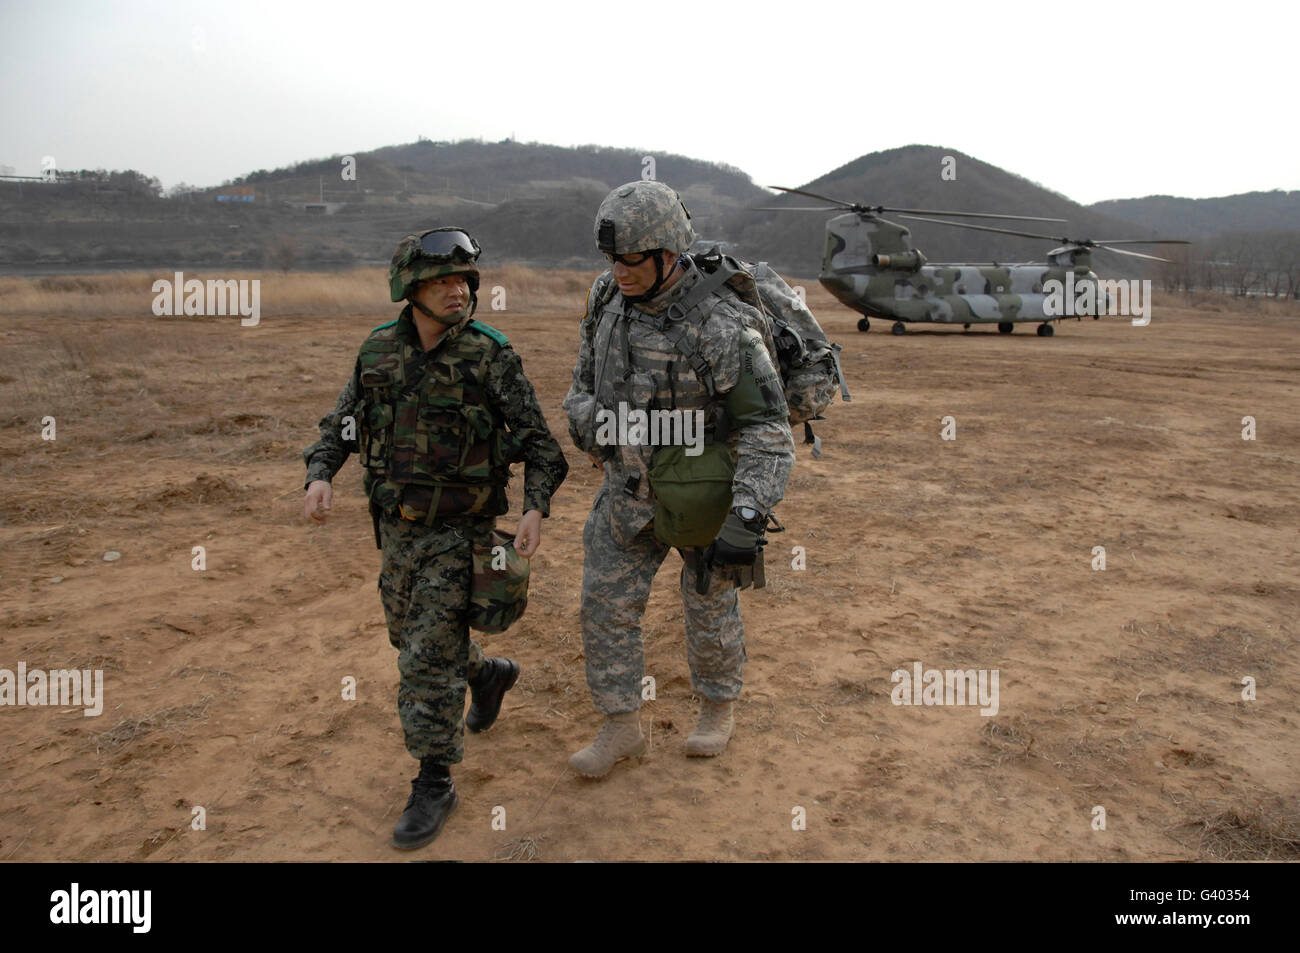 U.S. Army commander, right, and his deputy from the Republic of Korea Army. Stock Photo